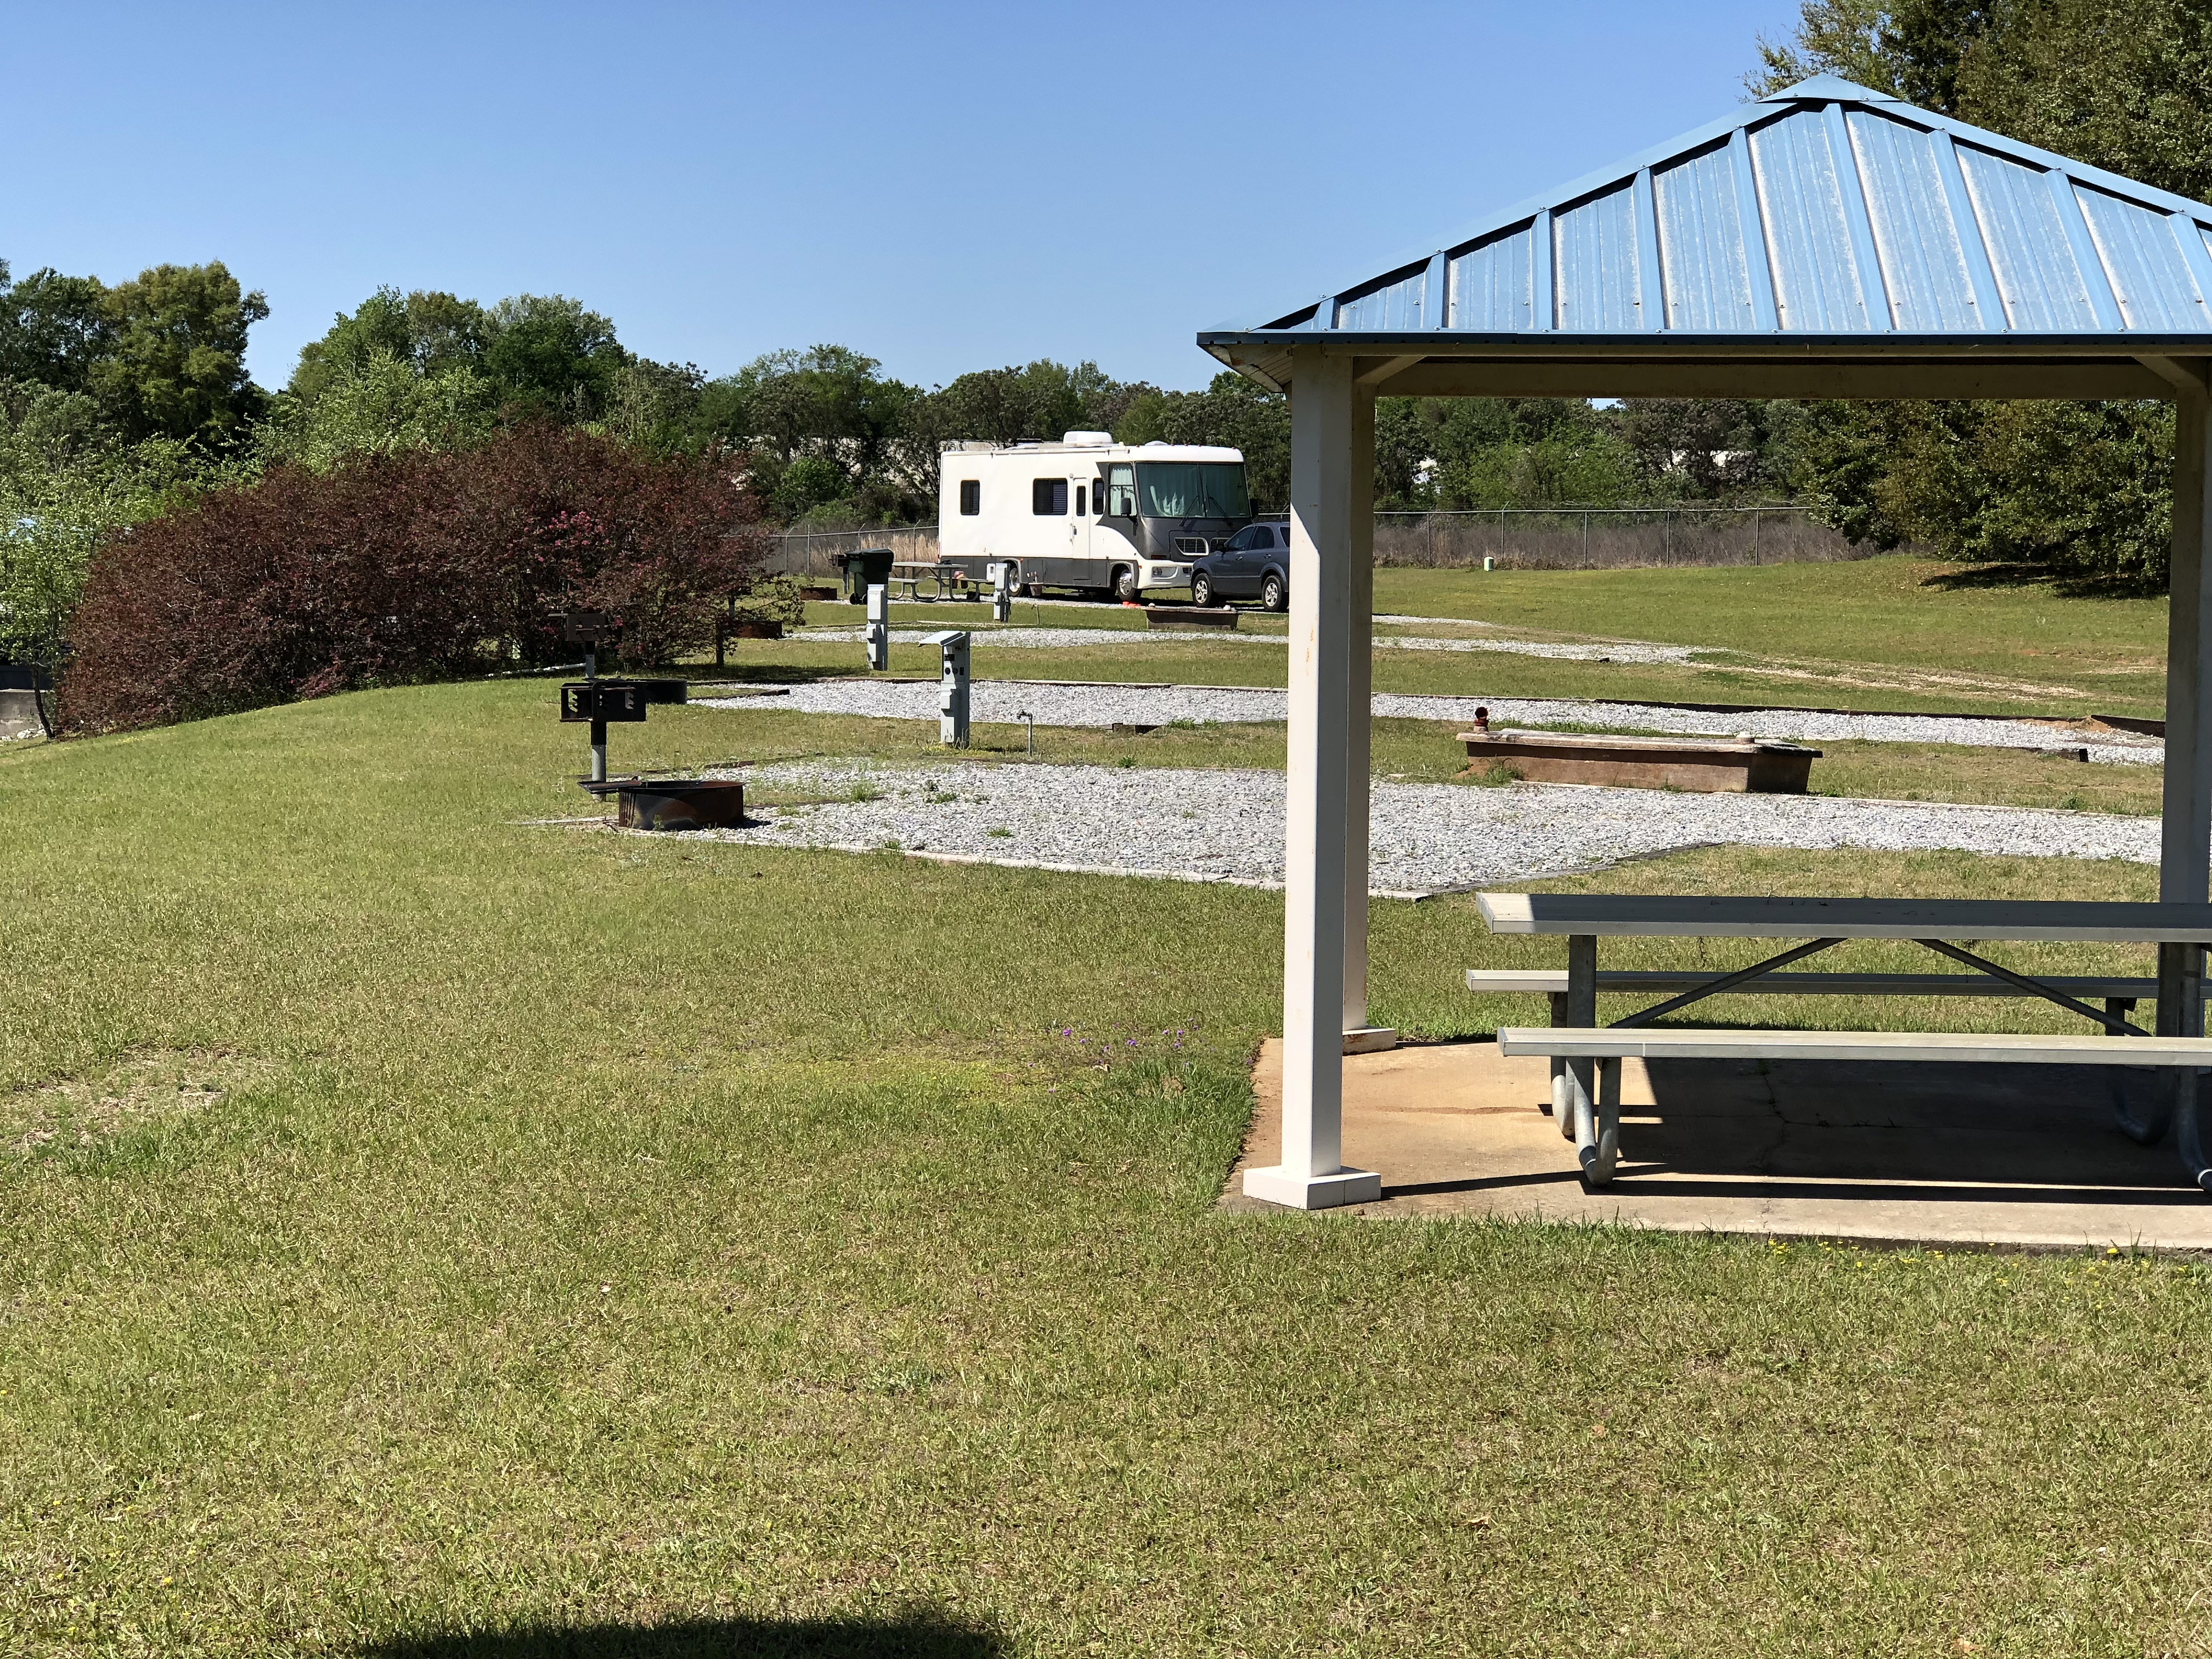 Scooter's RV Park